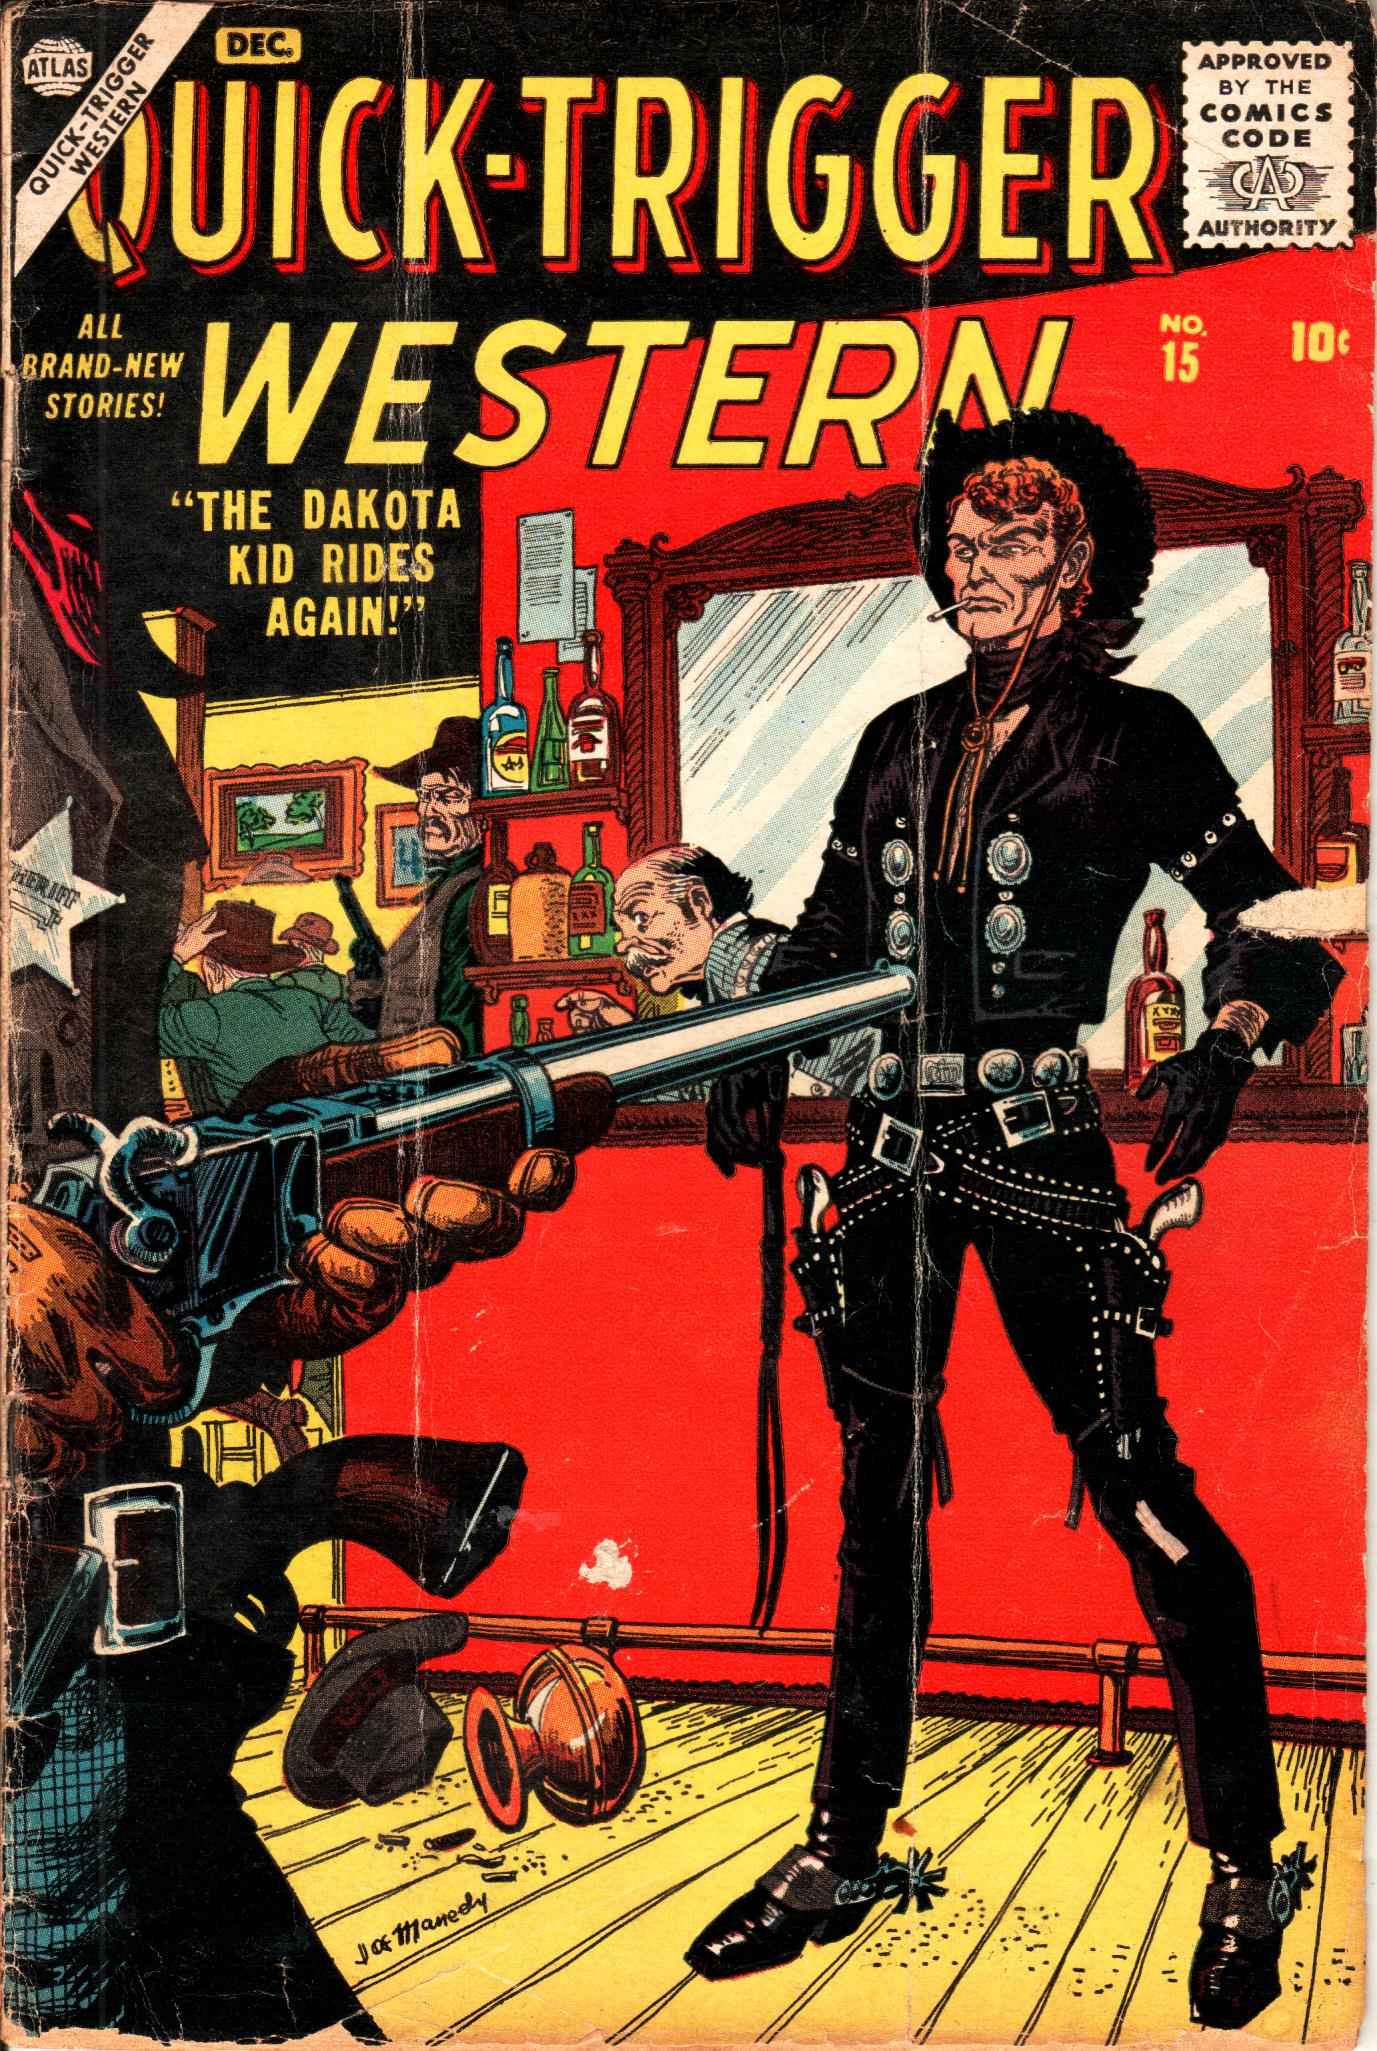 Read online Quick-Trigger Western comic -  Issue #15 - 1